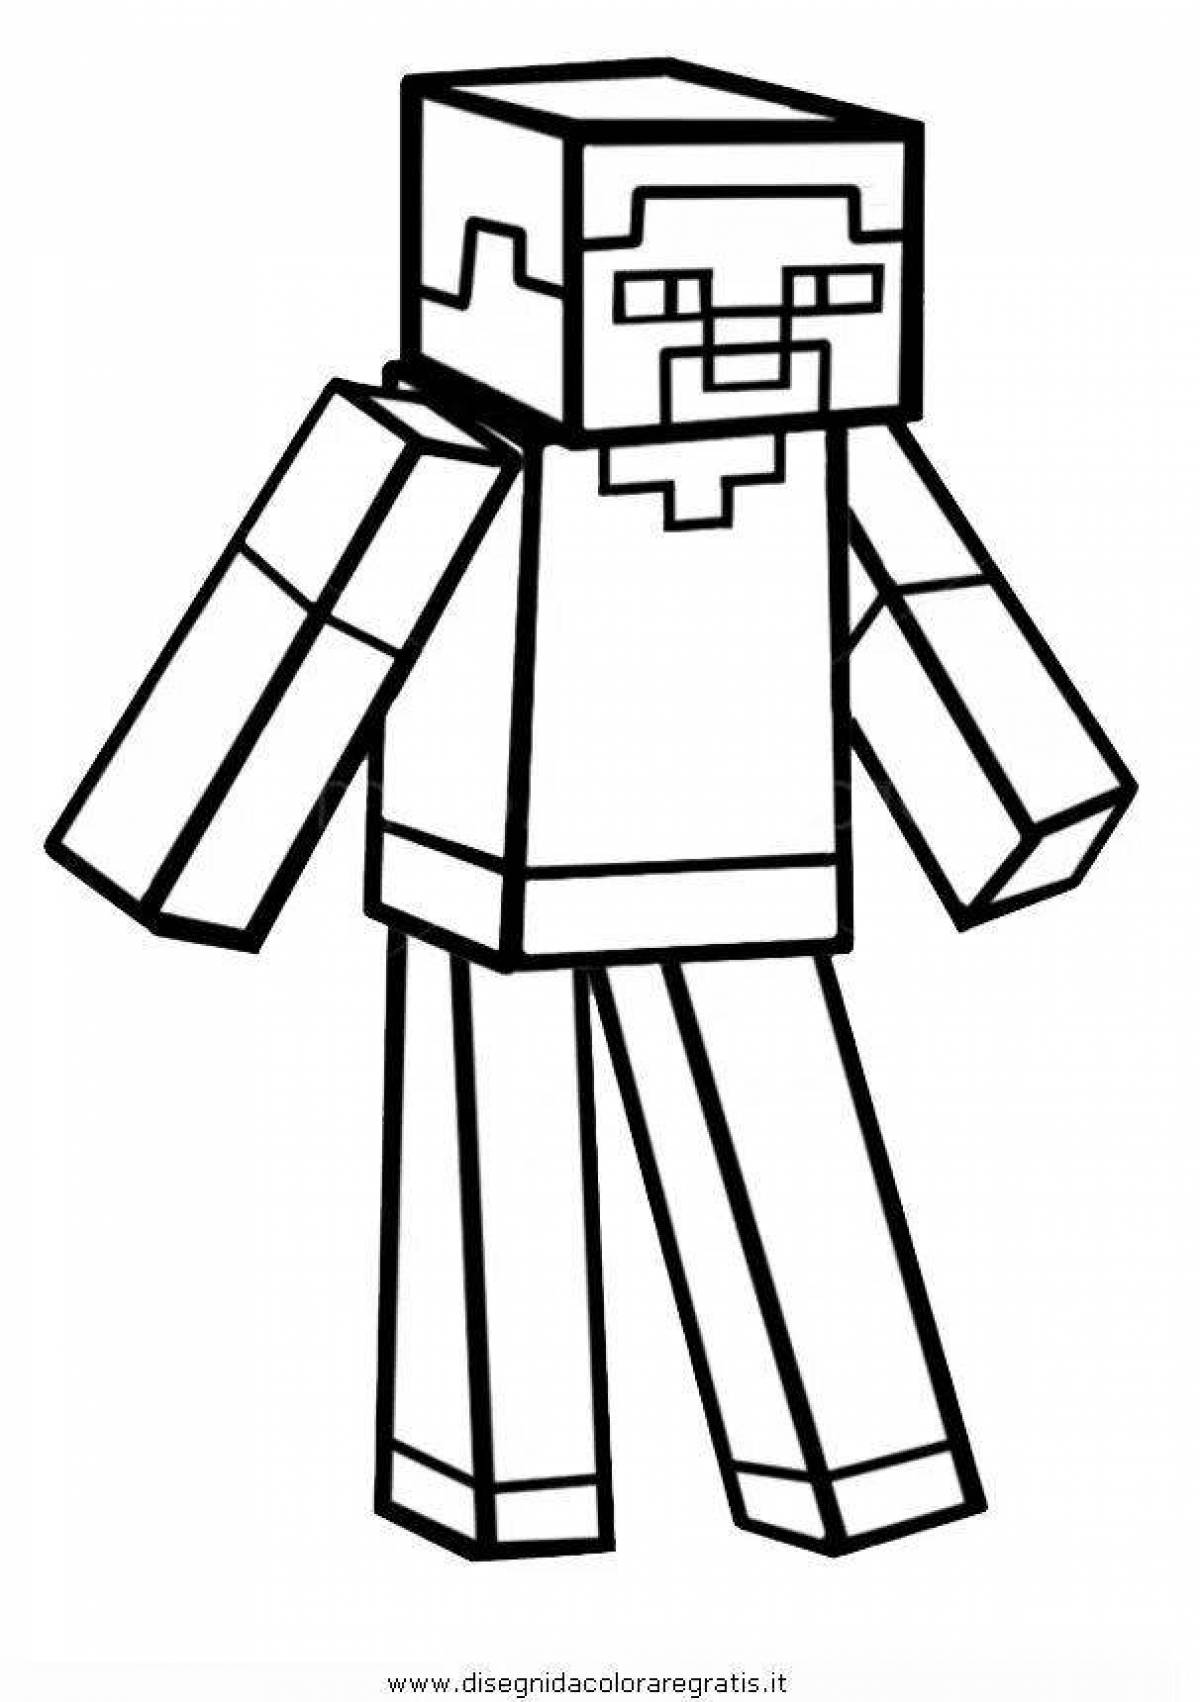 Witty minecraft herobrine coloring book